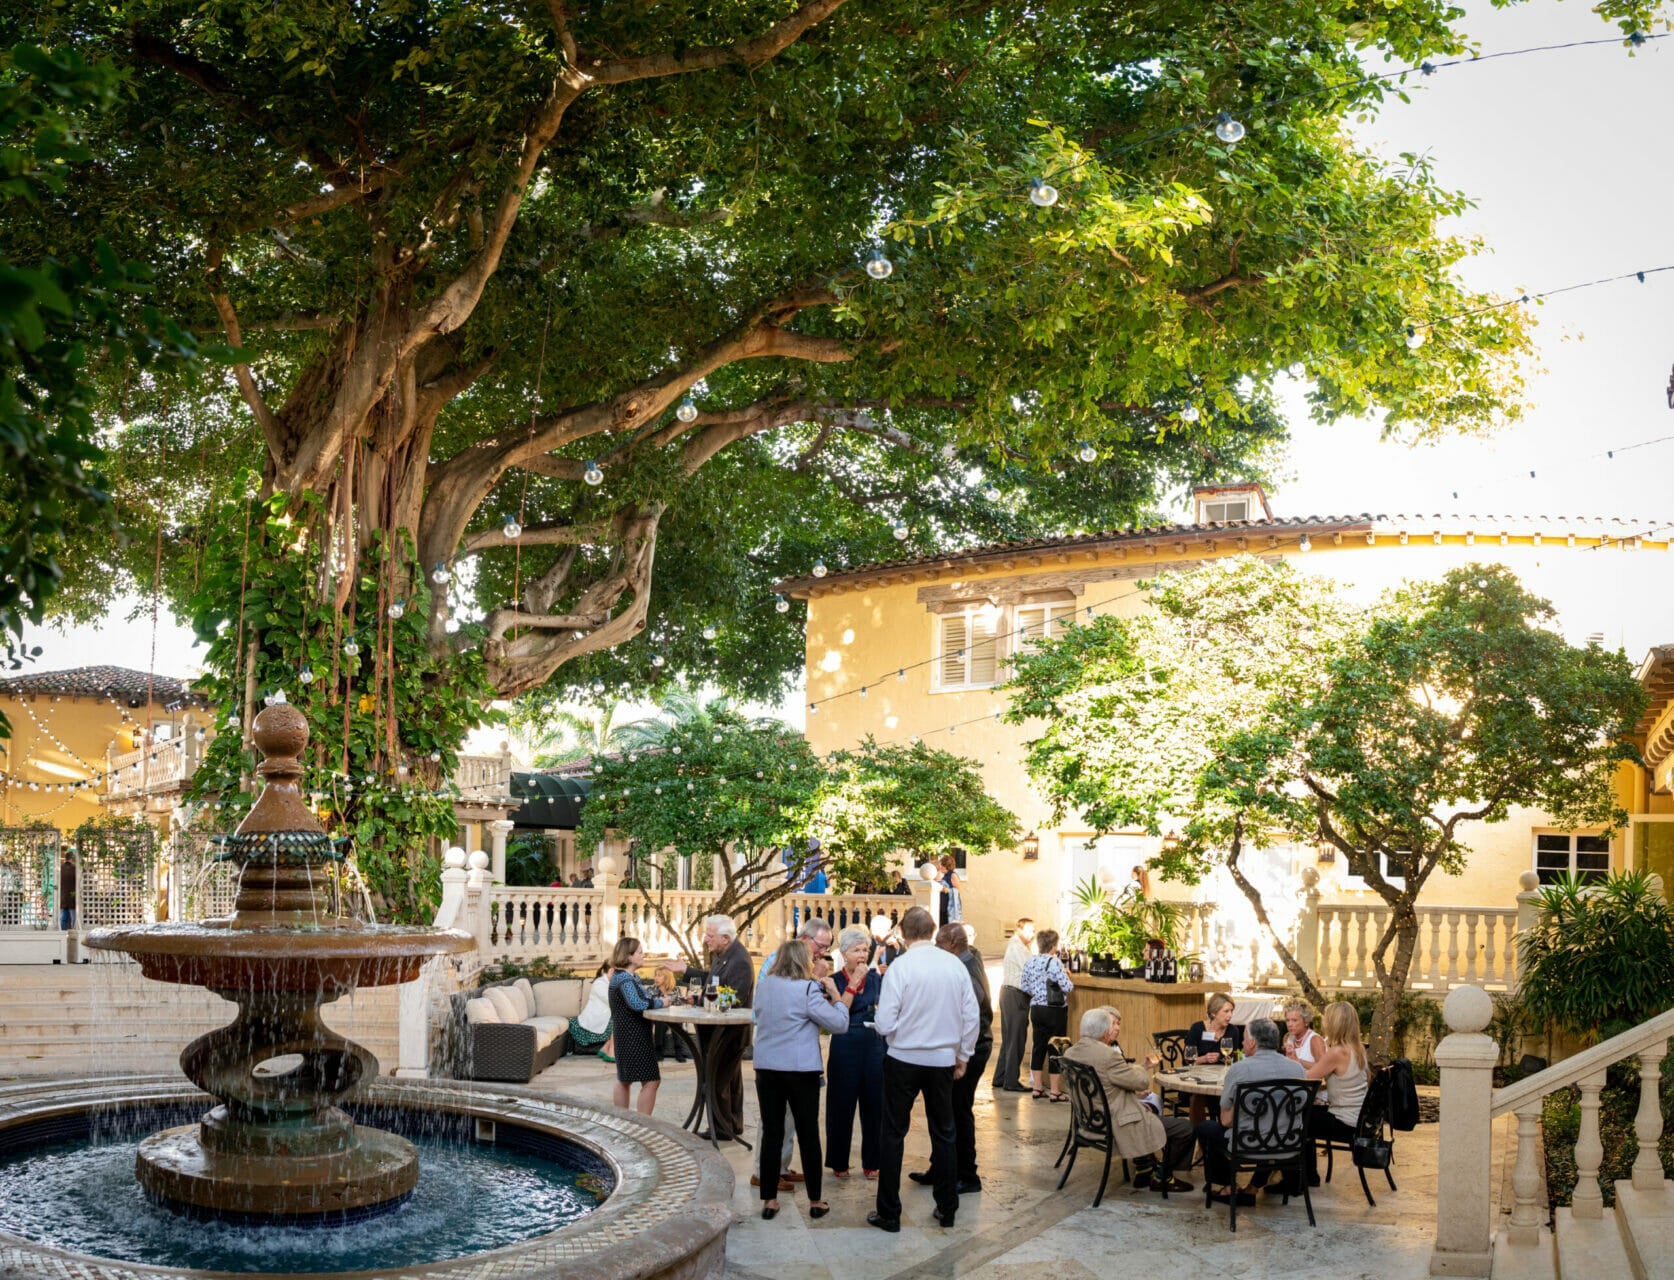 People standing around a fountain and tree